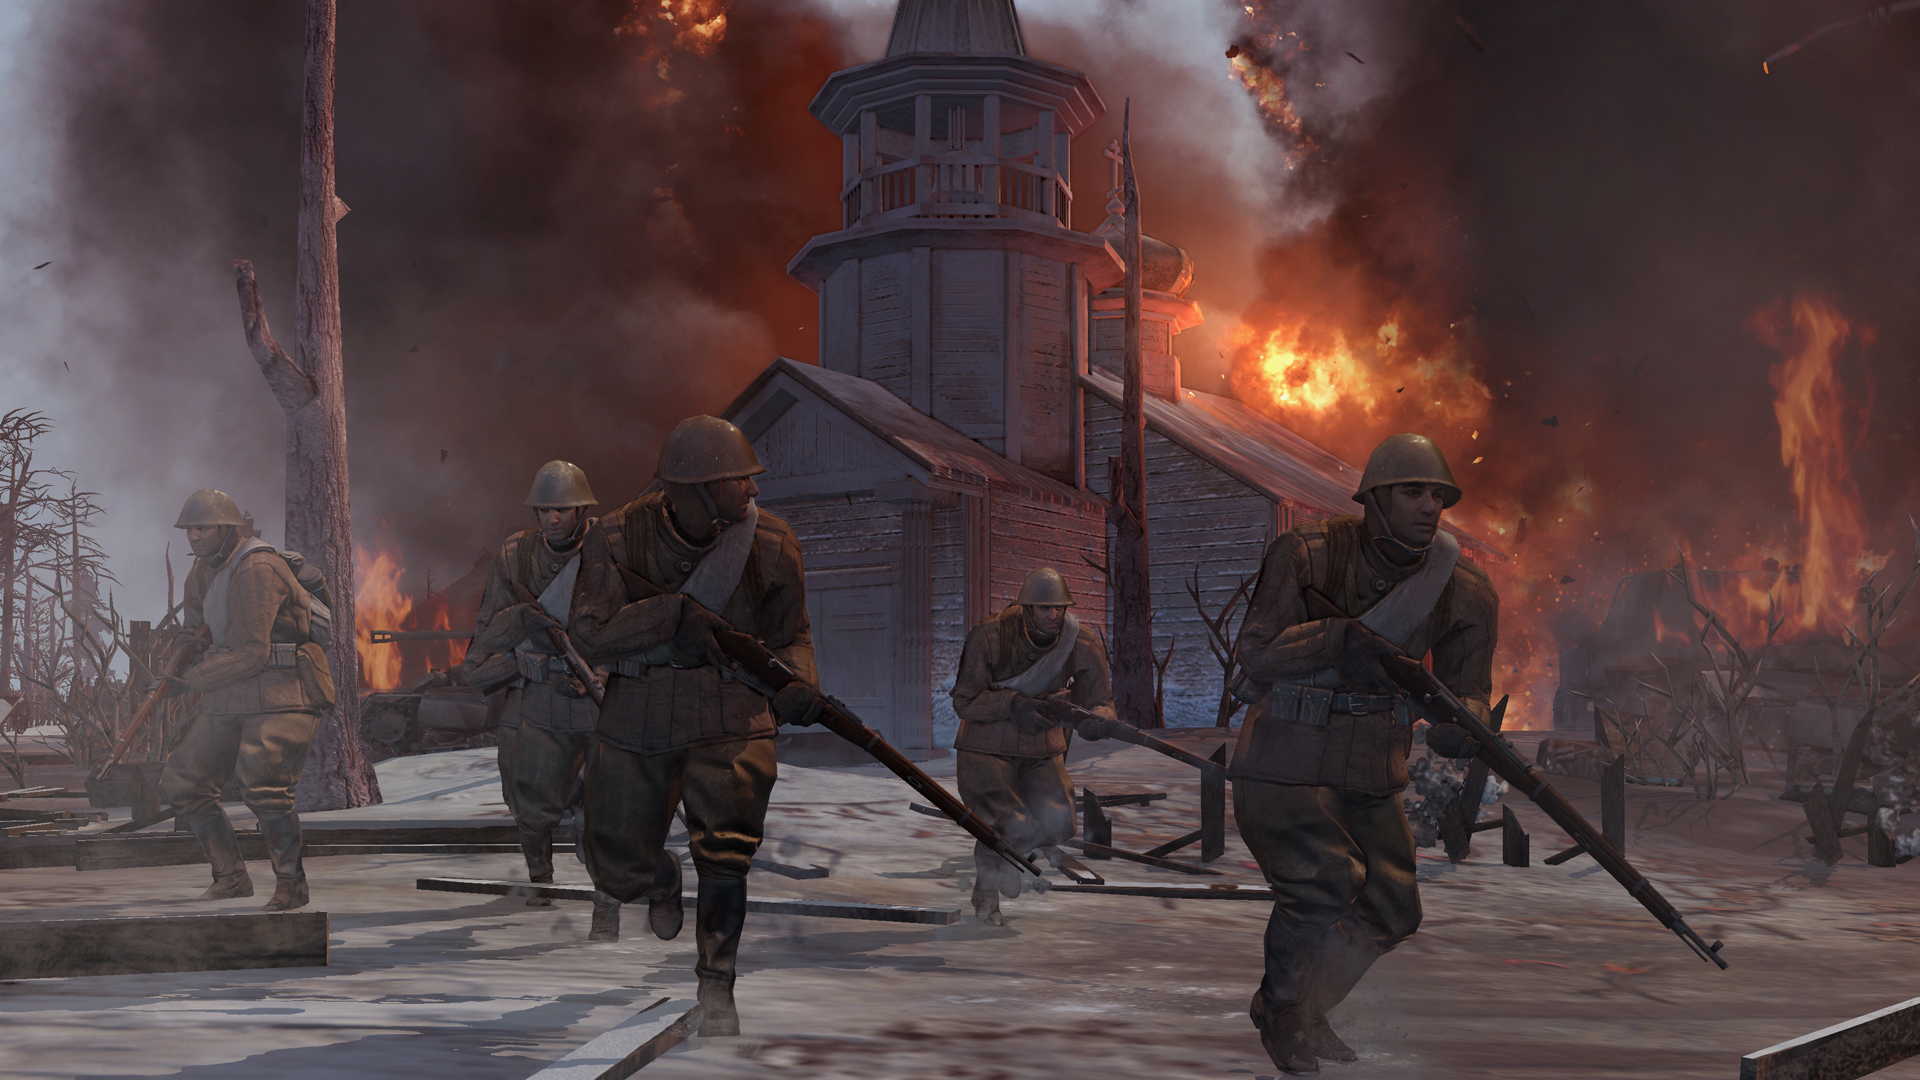 Preview: Company of Heroes 2